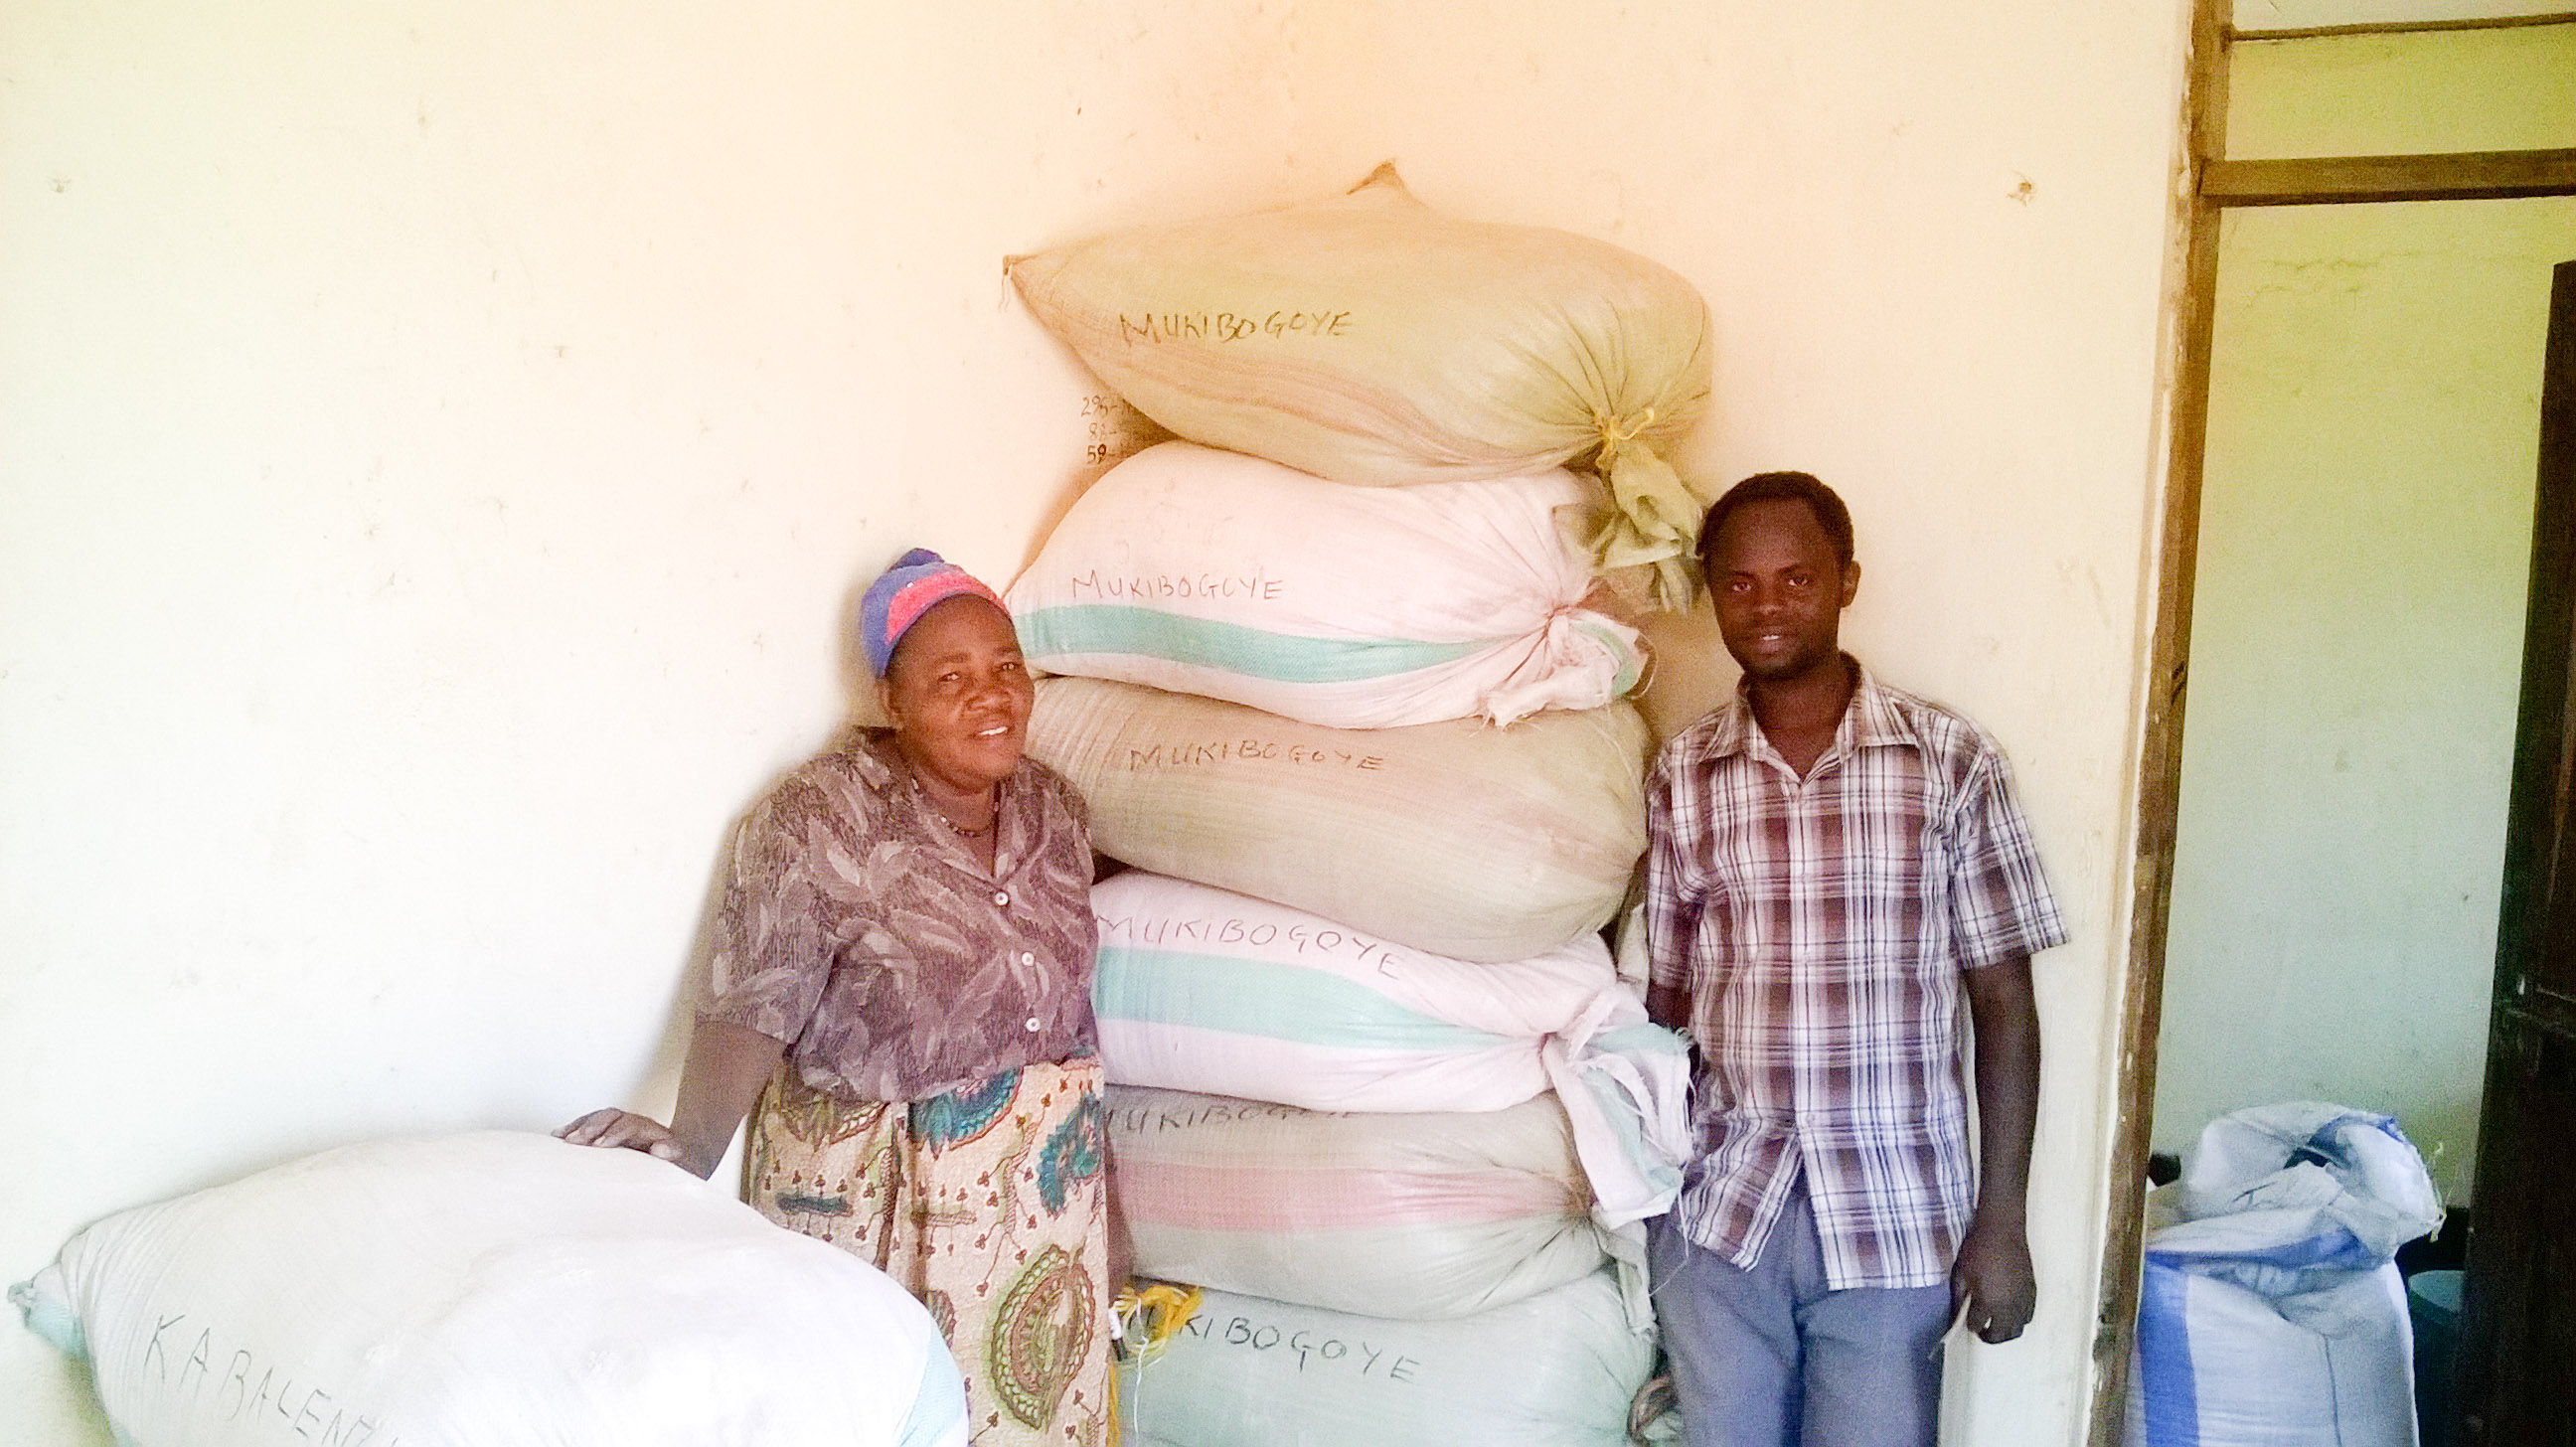 Lydia, program coordinator, and Daudi, assistant coordinator, next to the bags of breakfast nutrition mix they have just prepared.